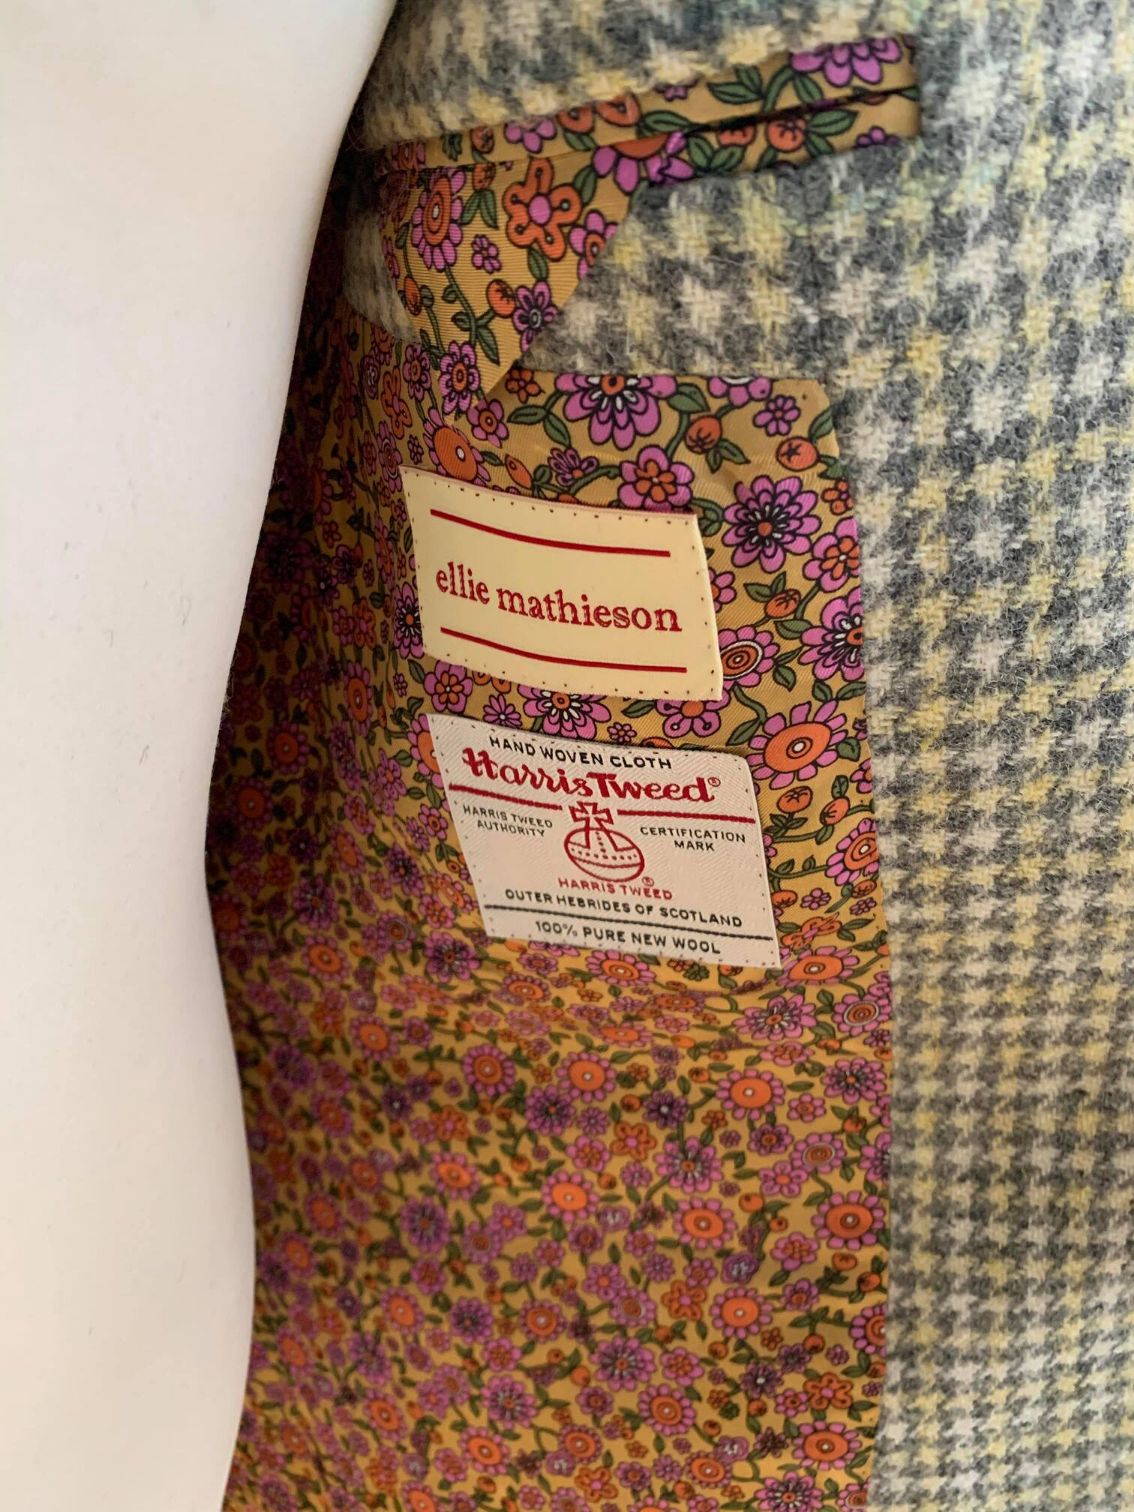 Inside of a jacket with Harry's Tweed label